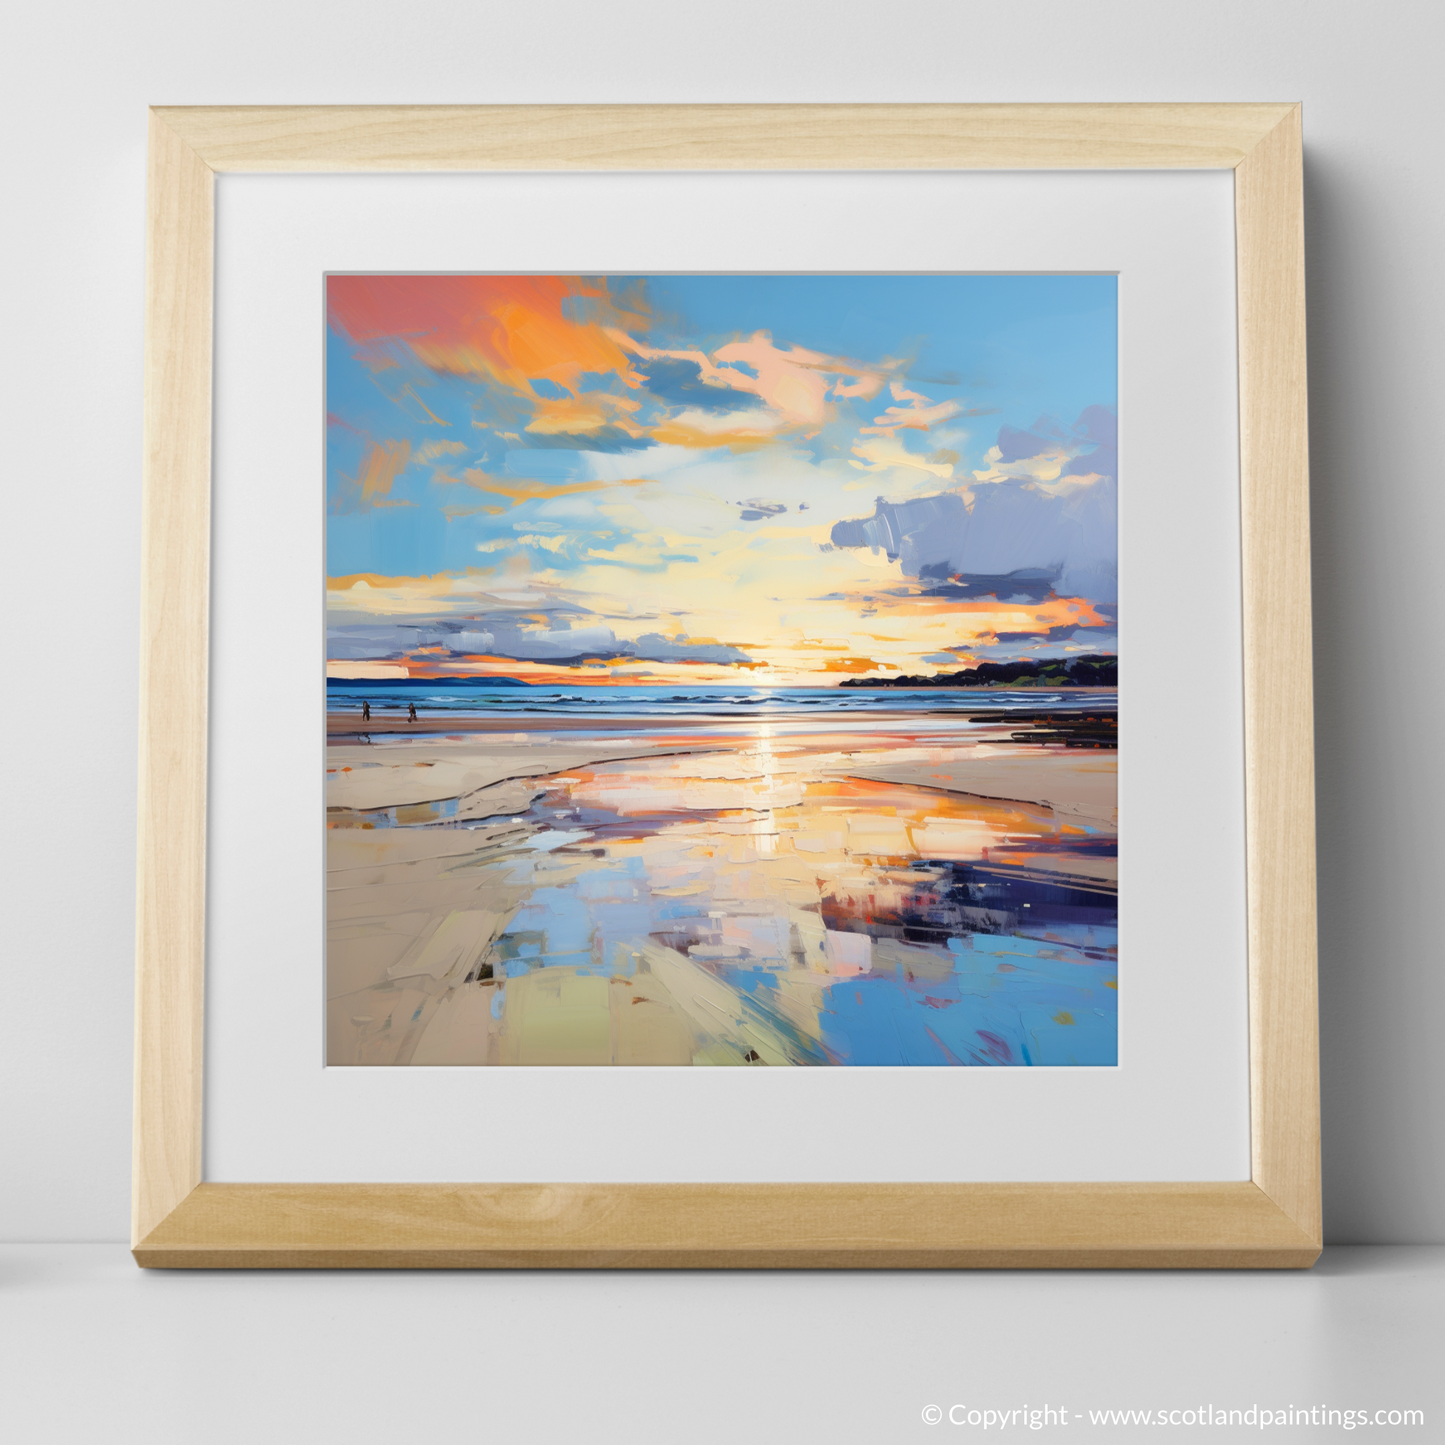 Art Print of Nairn Beach at golden hour with a natural frame